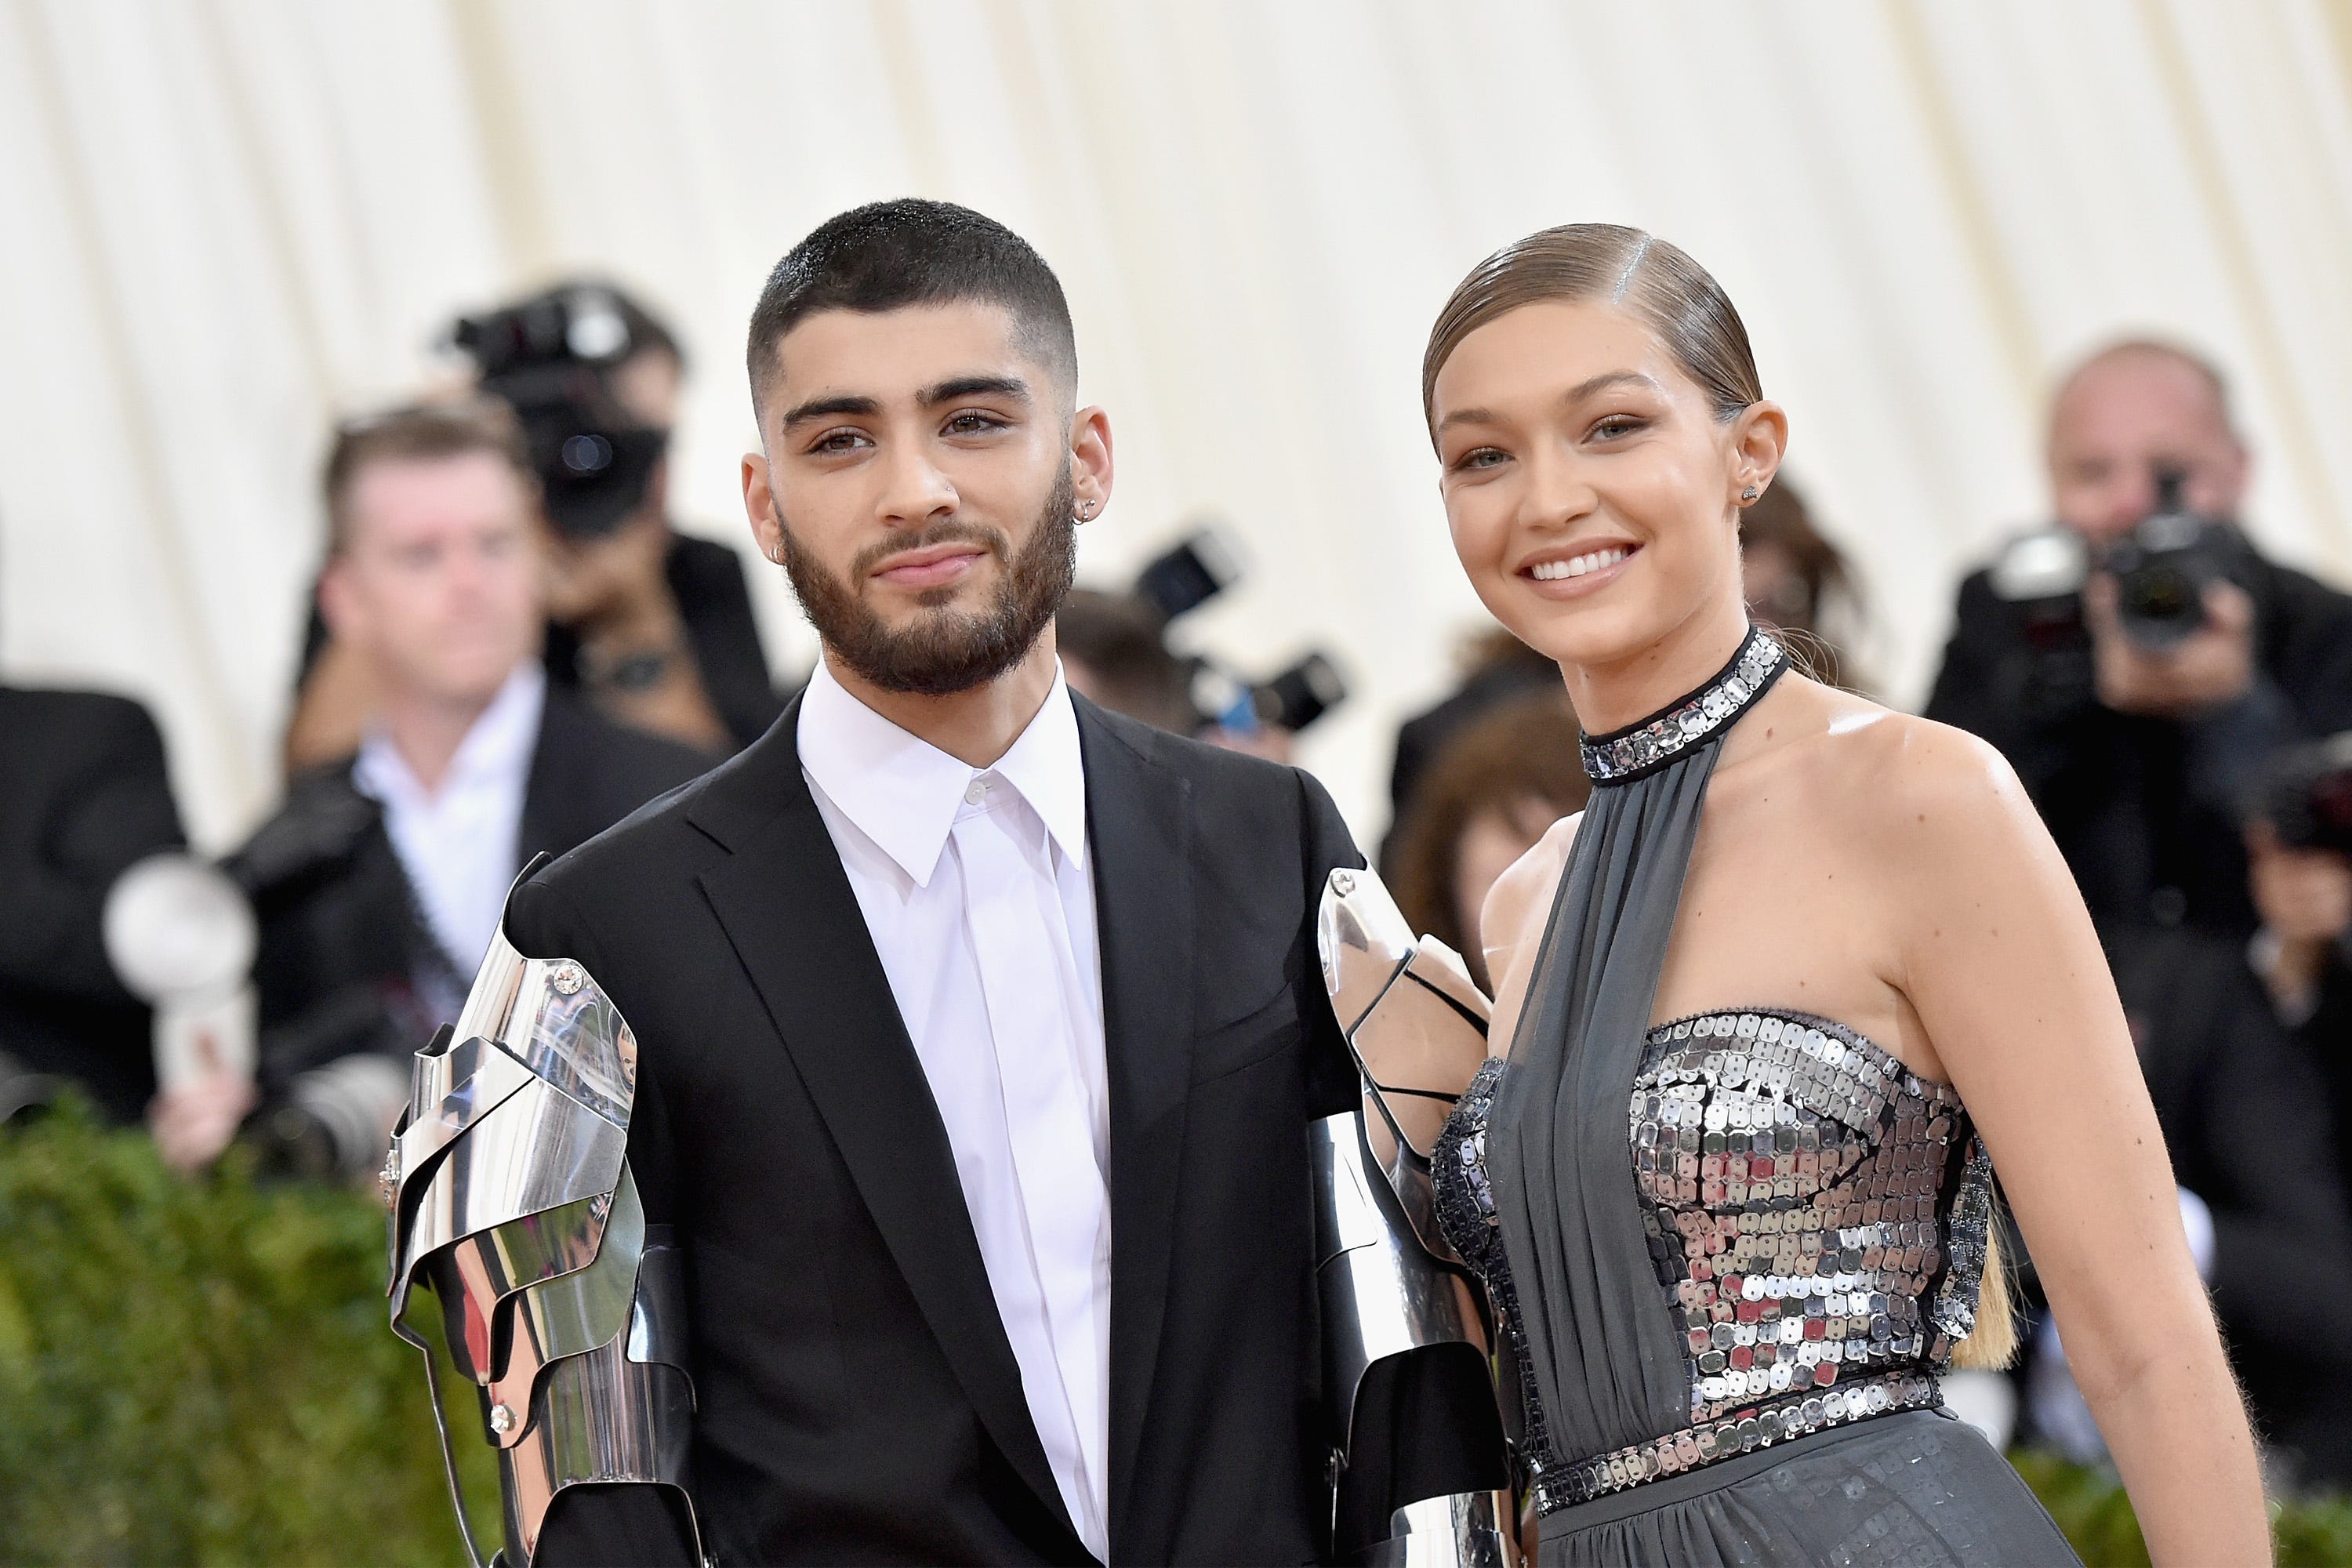 Gigi Hadid reveals her daughter's sweet name in an interesting way